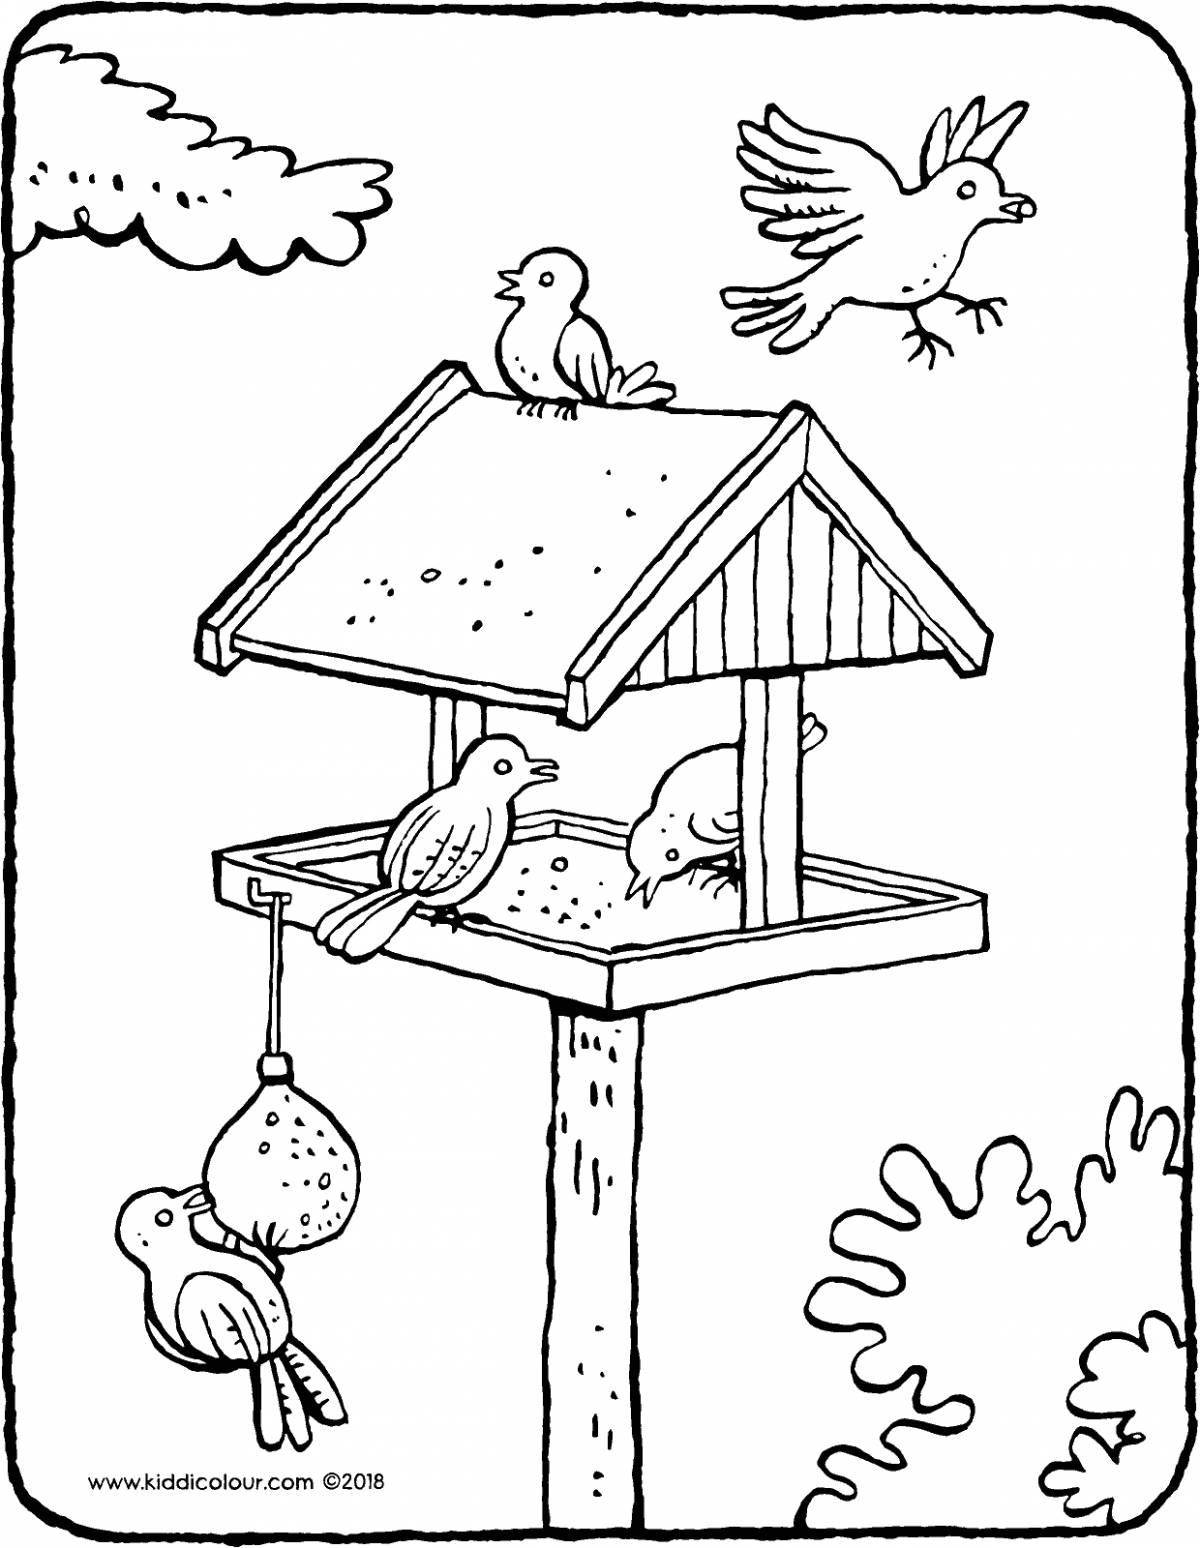 Great bird feeder coloring page for kids